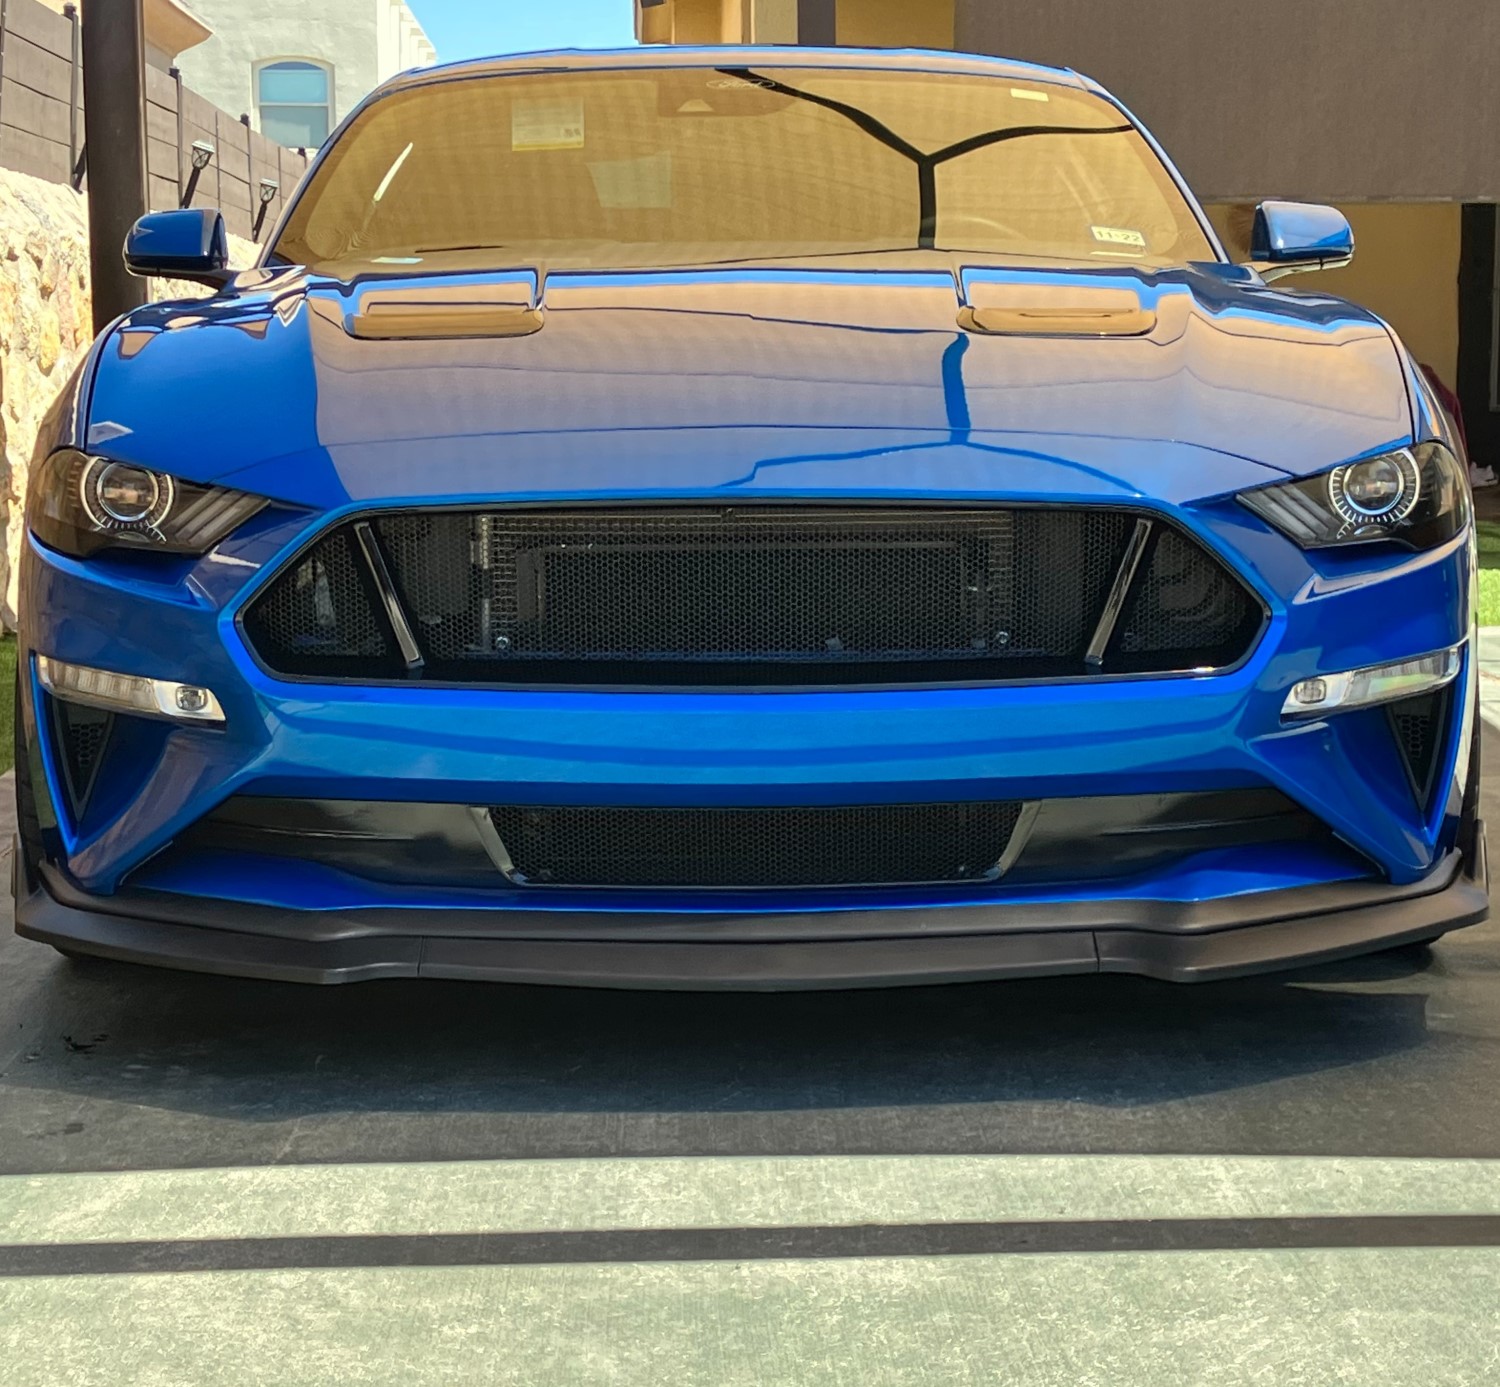 Aggressive Style: Custom Black Grille Upgrade for Blue 6th Gen Mustang